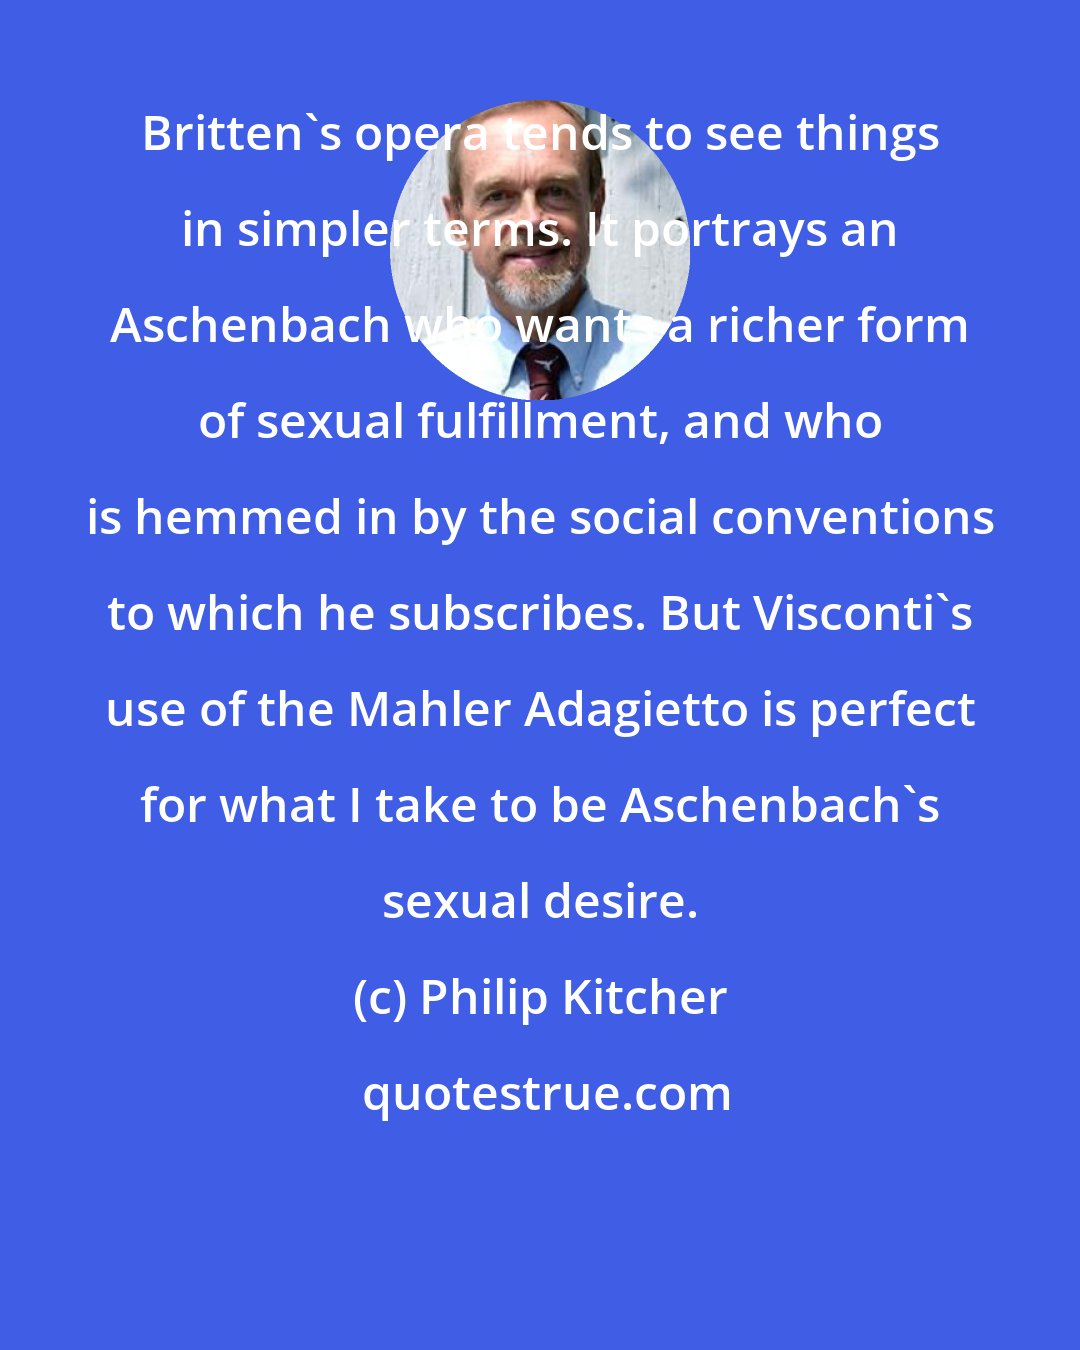 Philip Kitcher: Britten's opera tends to see things in simpler terms. It portrays an Aschenbach who wants a richer form of sexual fulfillment, and who is hemmed in by the social conventions to which he subscribes. But Visconti's use of the Mahler Adagietto is perfect for what I take to be Aschenbach's sexual desire.